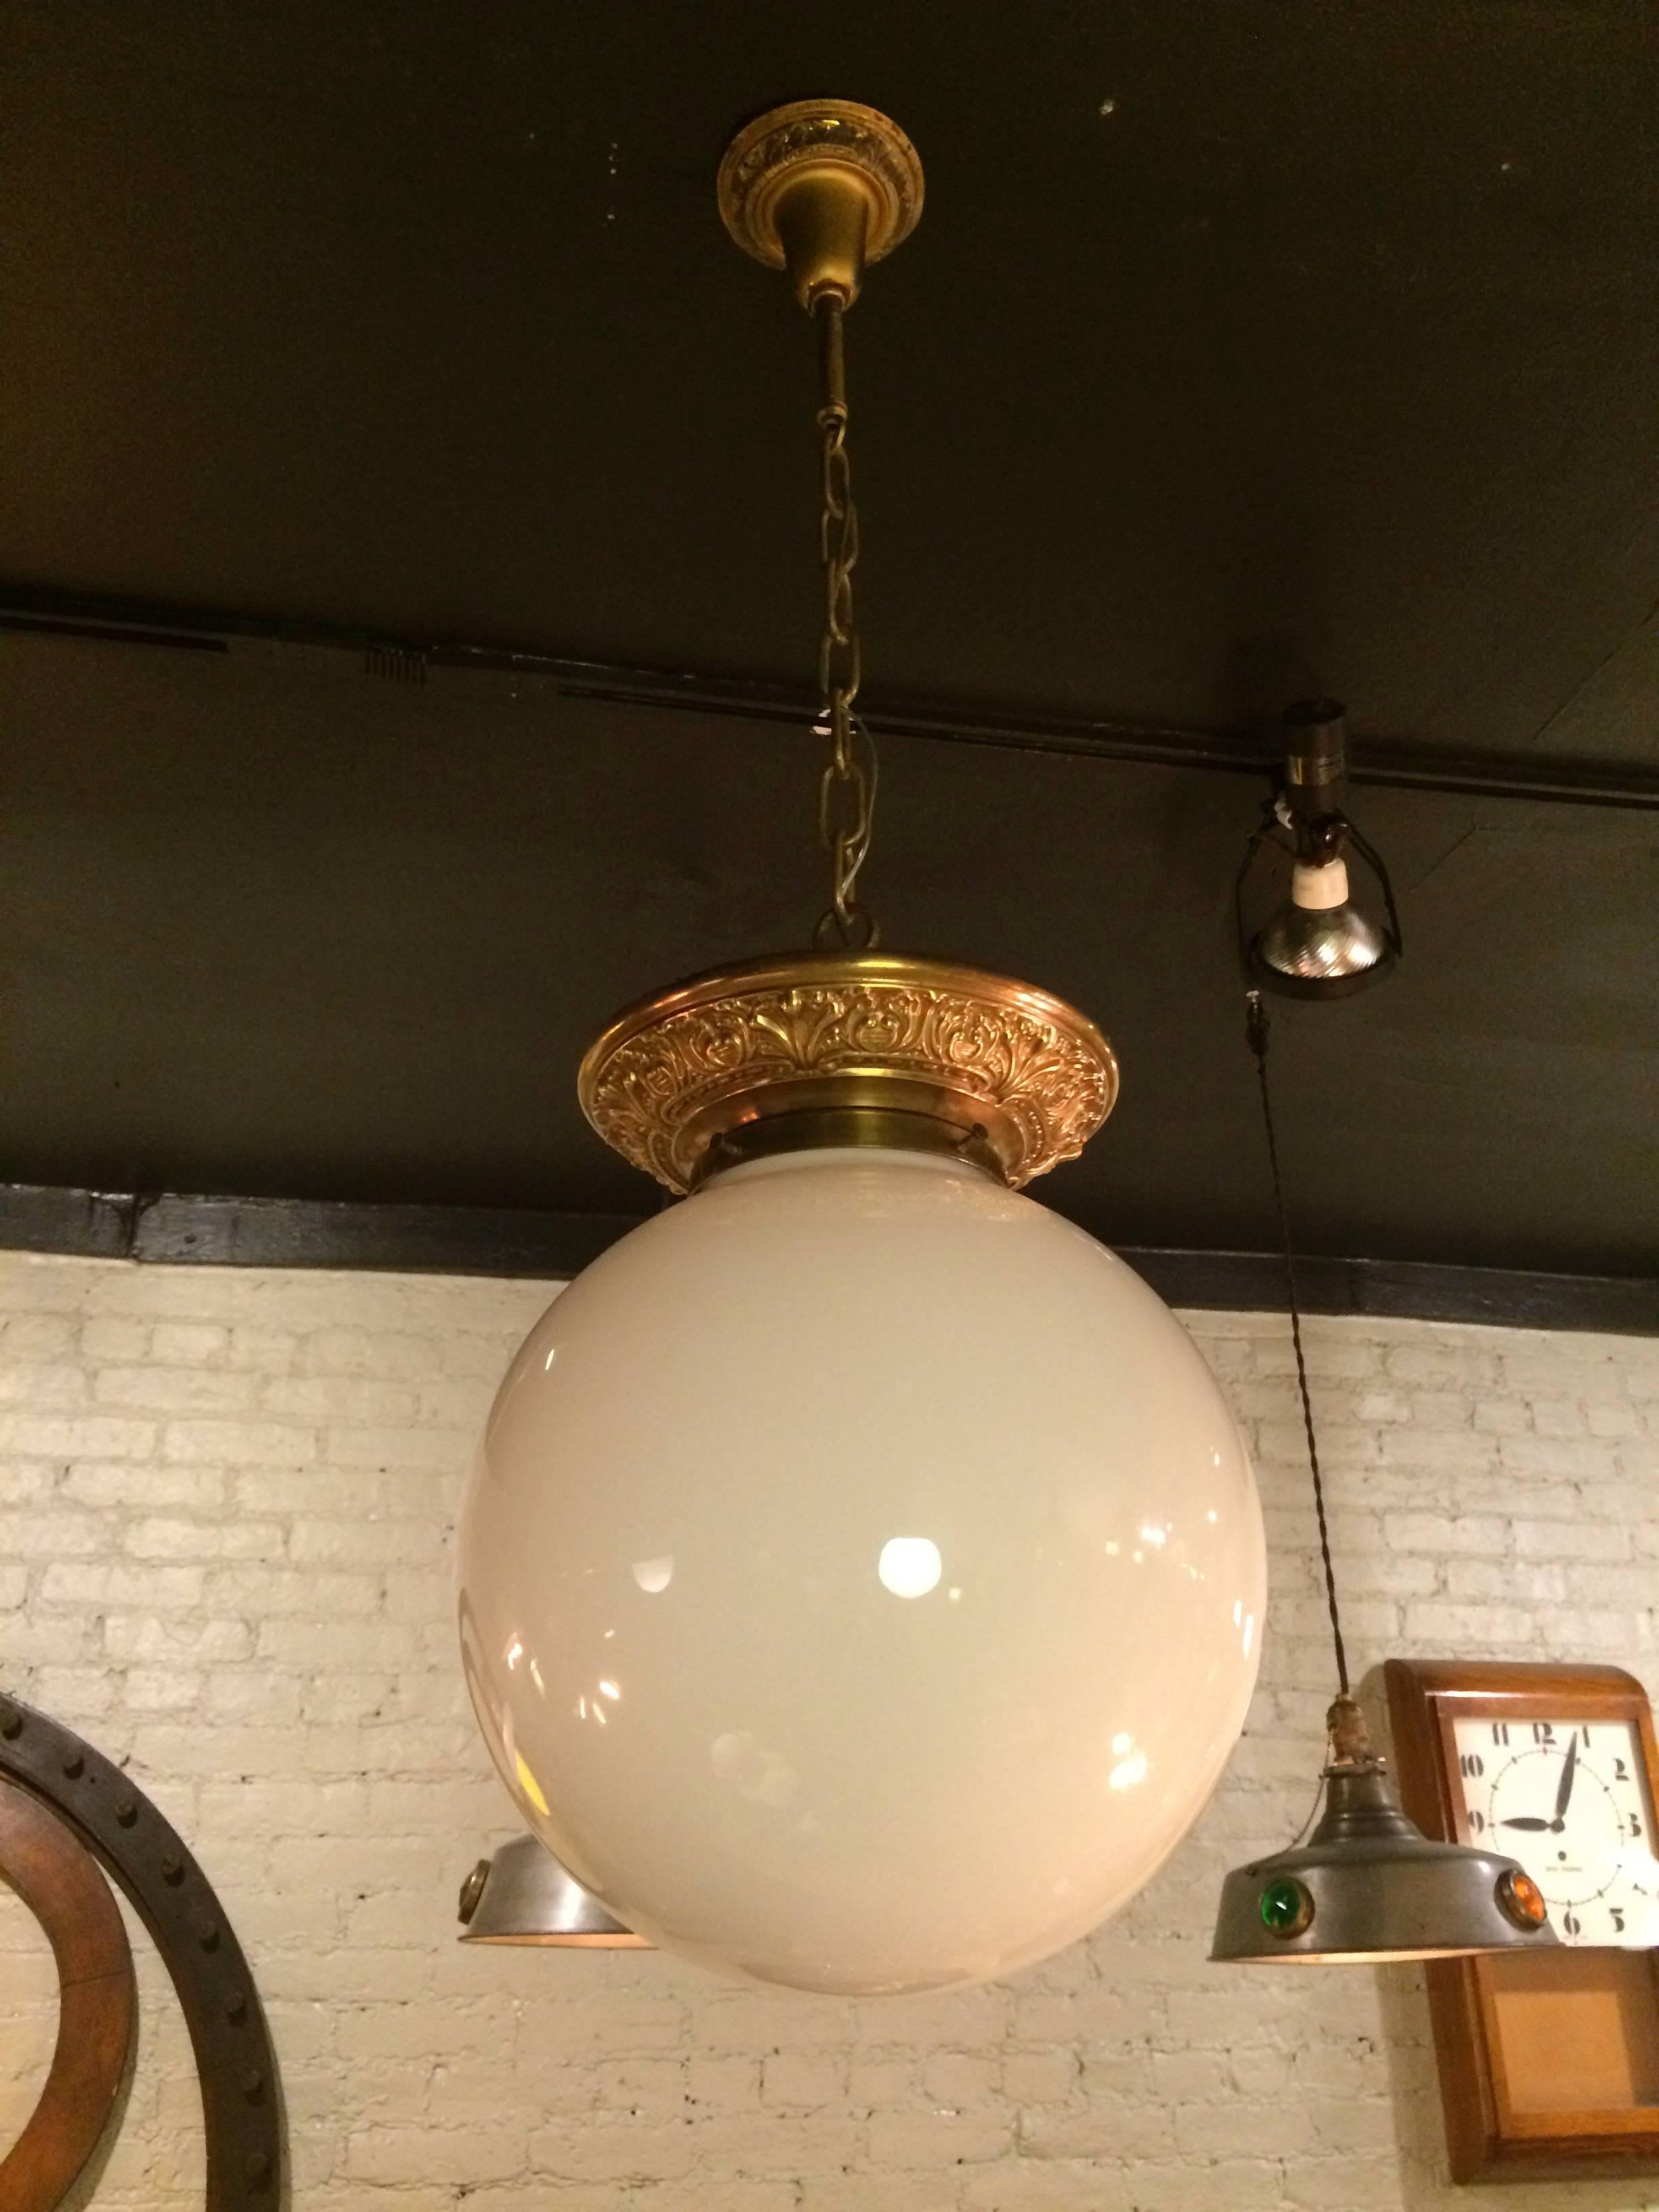 Exceptional and rare, large, handblown, milk glass globe, library pendant light with matching filigree brass fitter, canopy and chain. Brass filigree fitter is a decorative crown to this pendant light and not a flush mount on a chain. Height to top